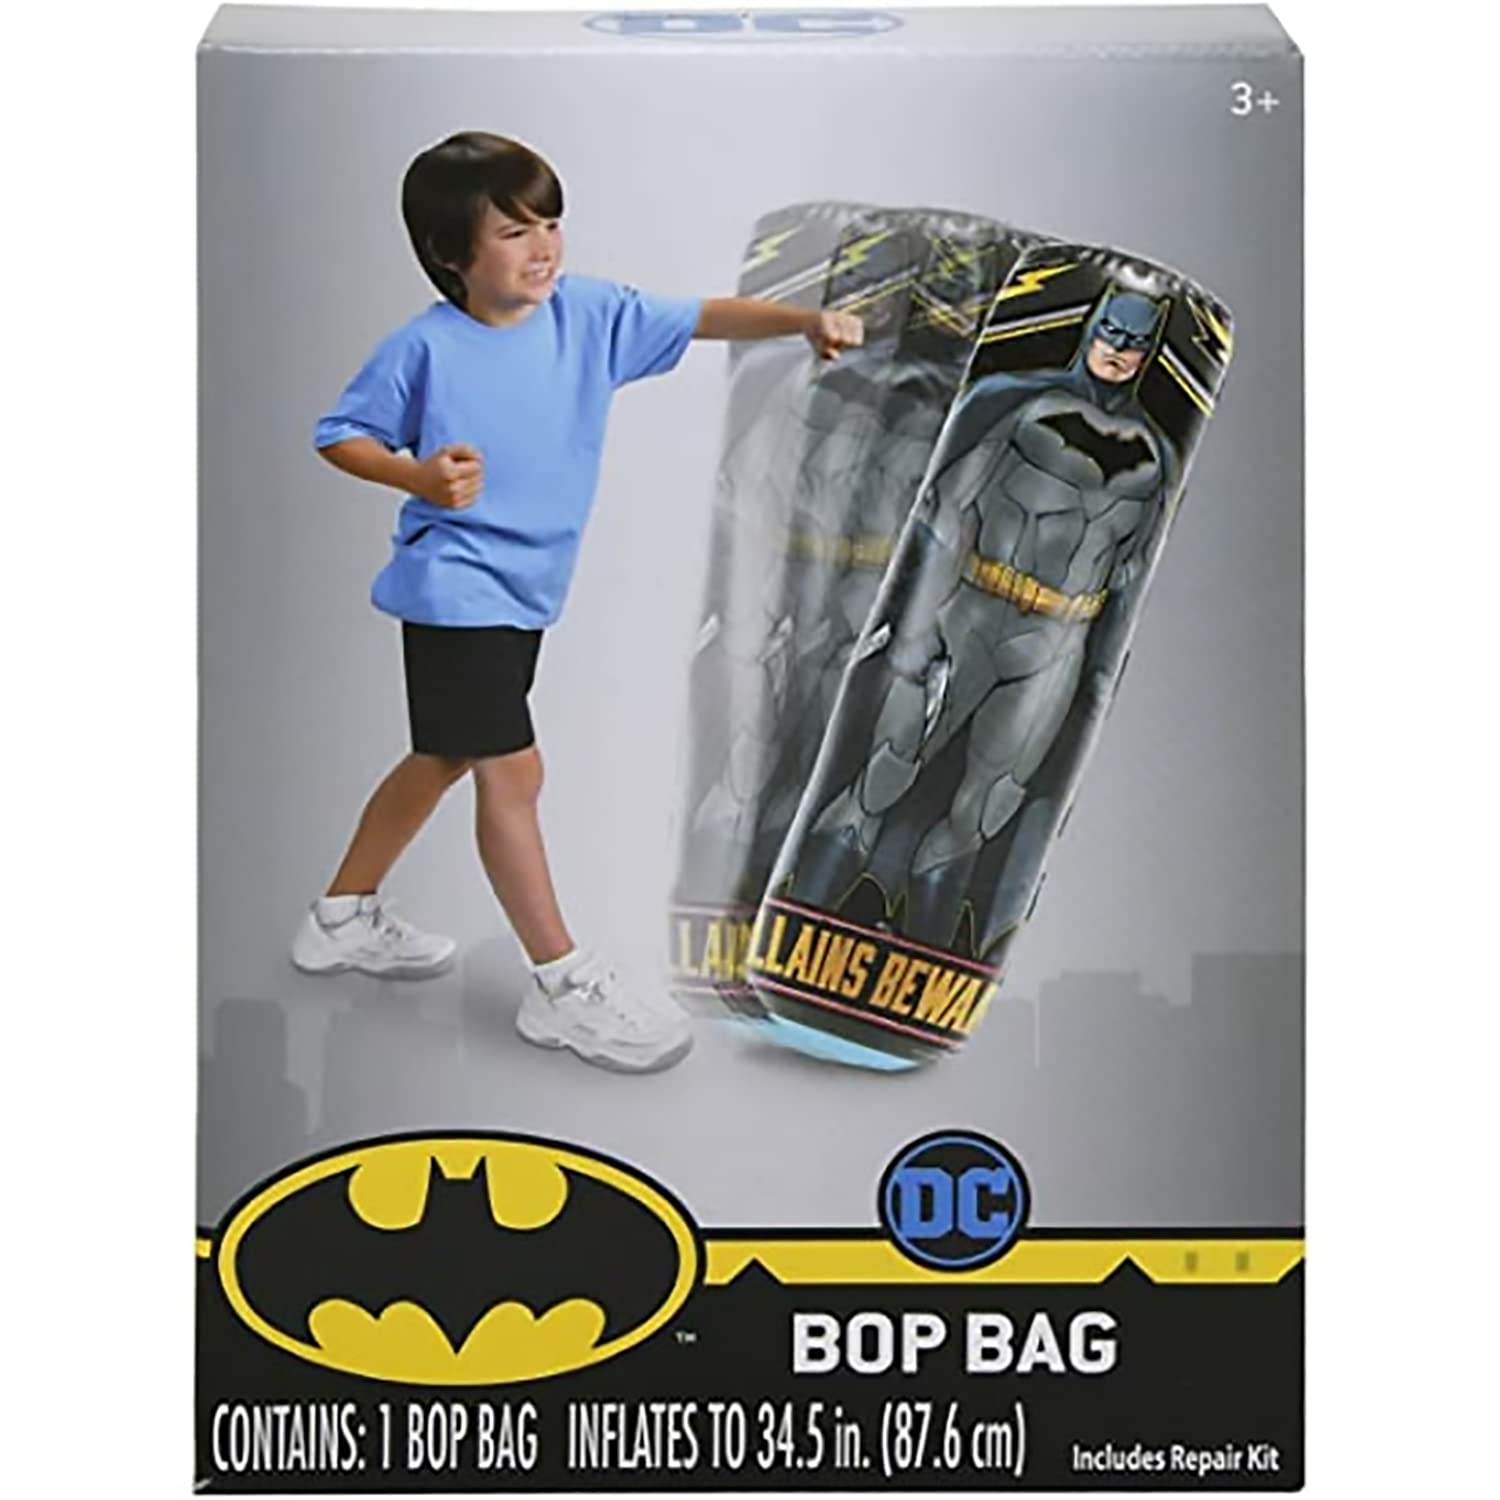 What Kids Want, Inc What Kids Want Batman Punching Bag for Kids - Freestanding Inflatable Boxing Bag Indoor and Outdoor Kids Bop Bag Toy for